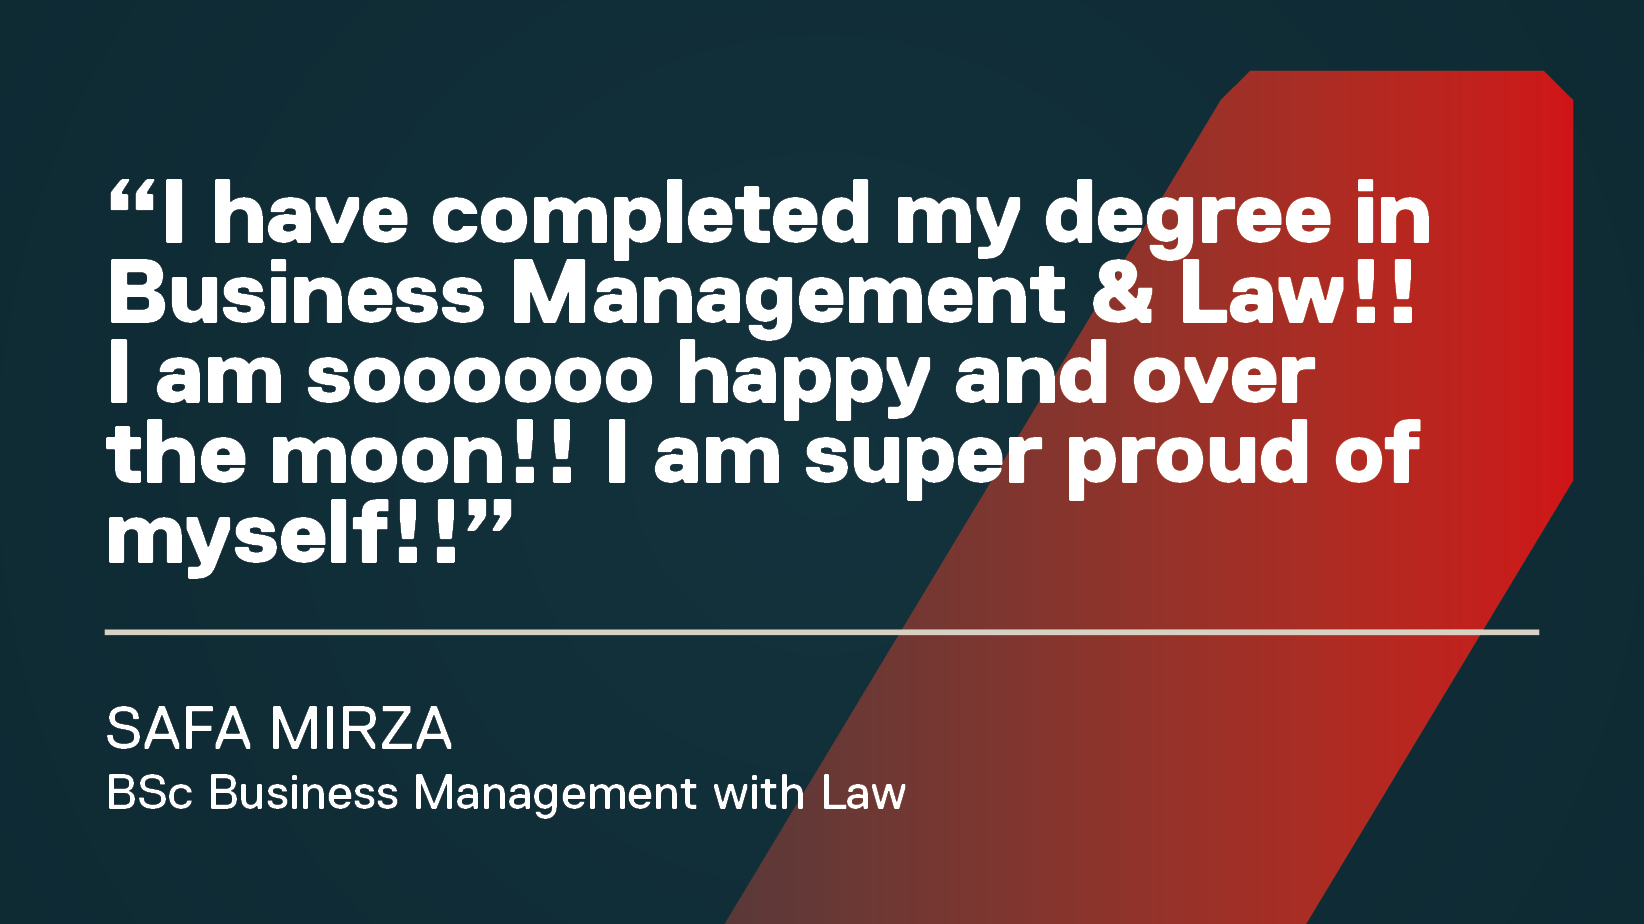 Quote from Safa Mirza about completing degree